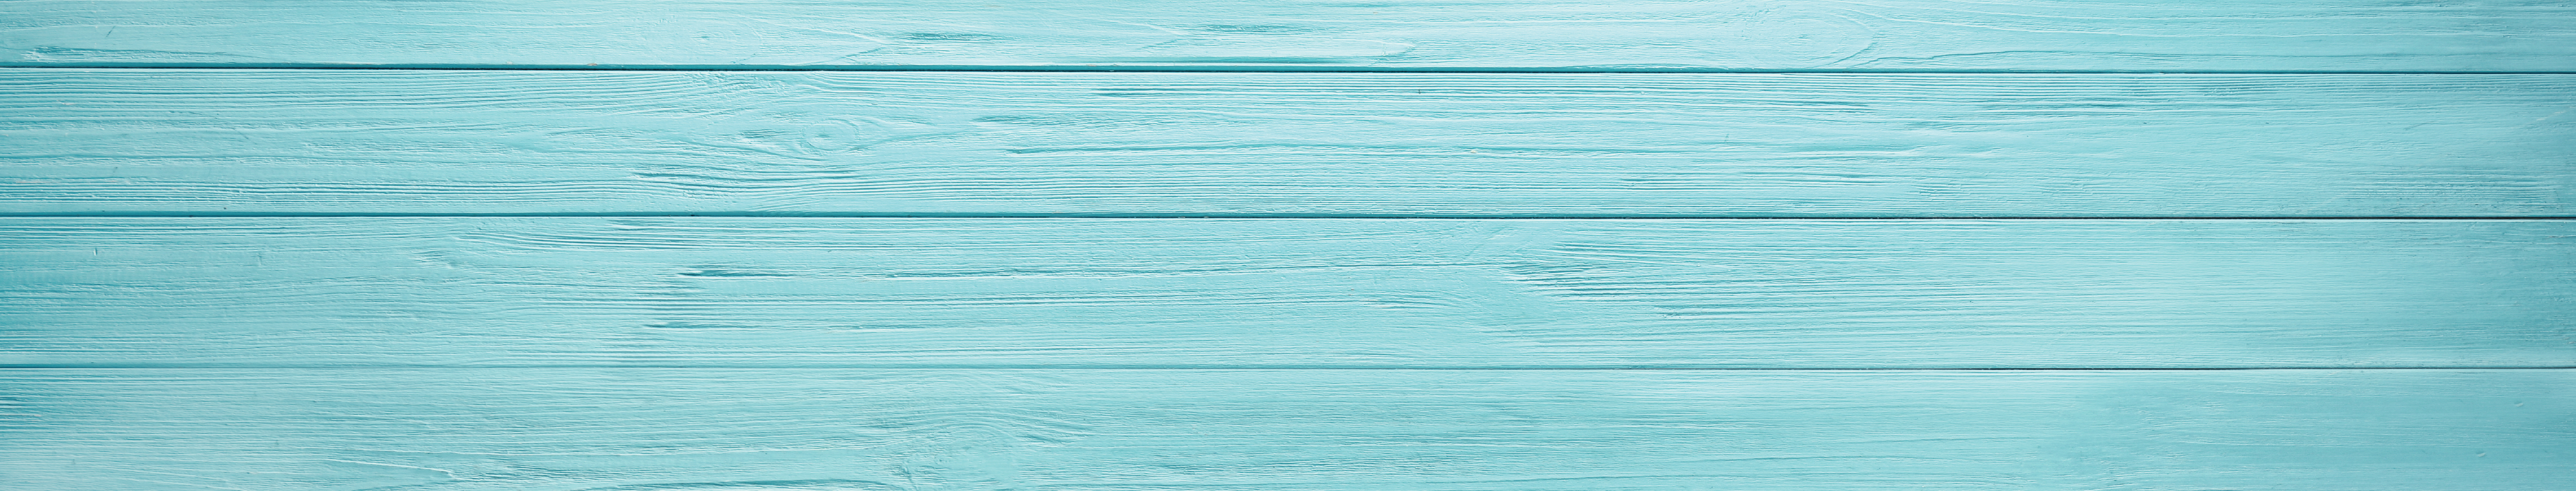 Teal colored wood background